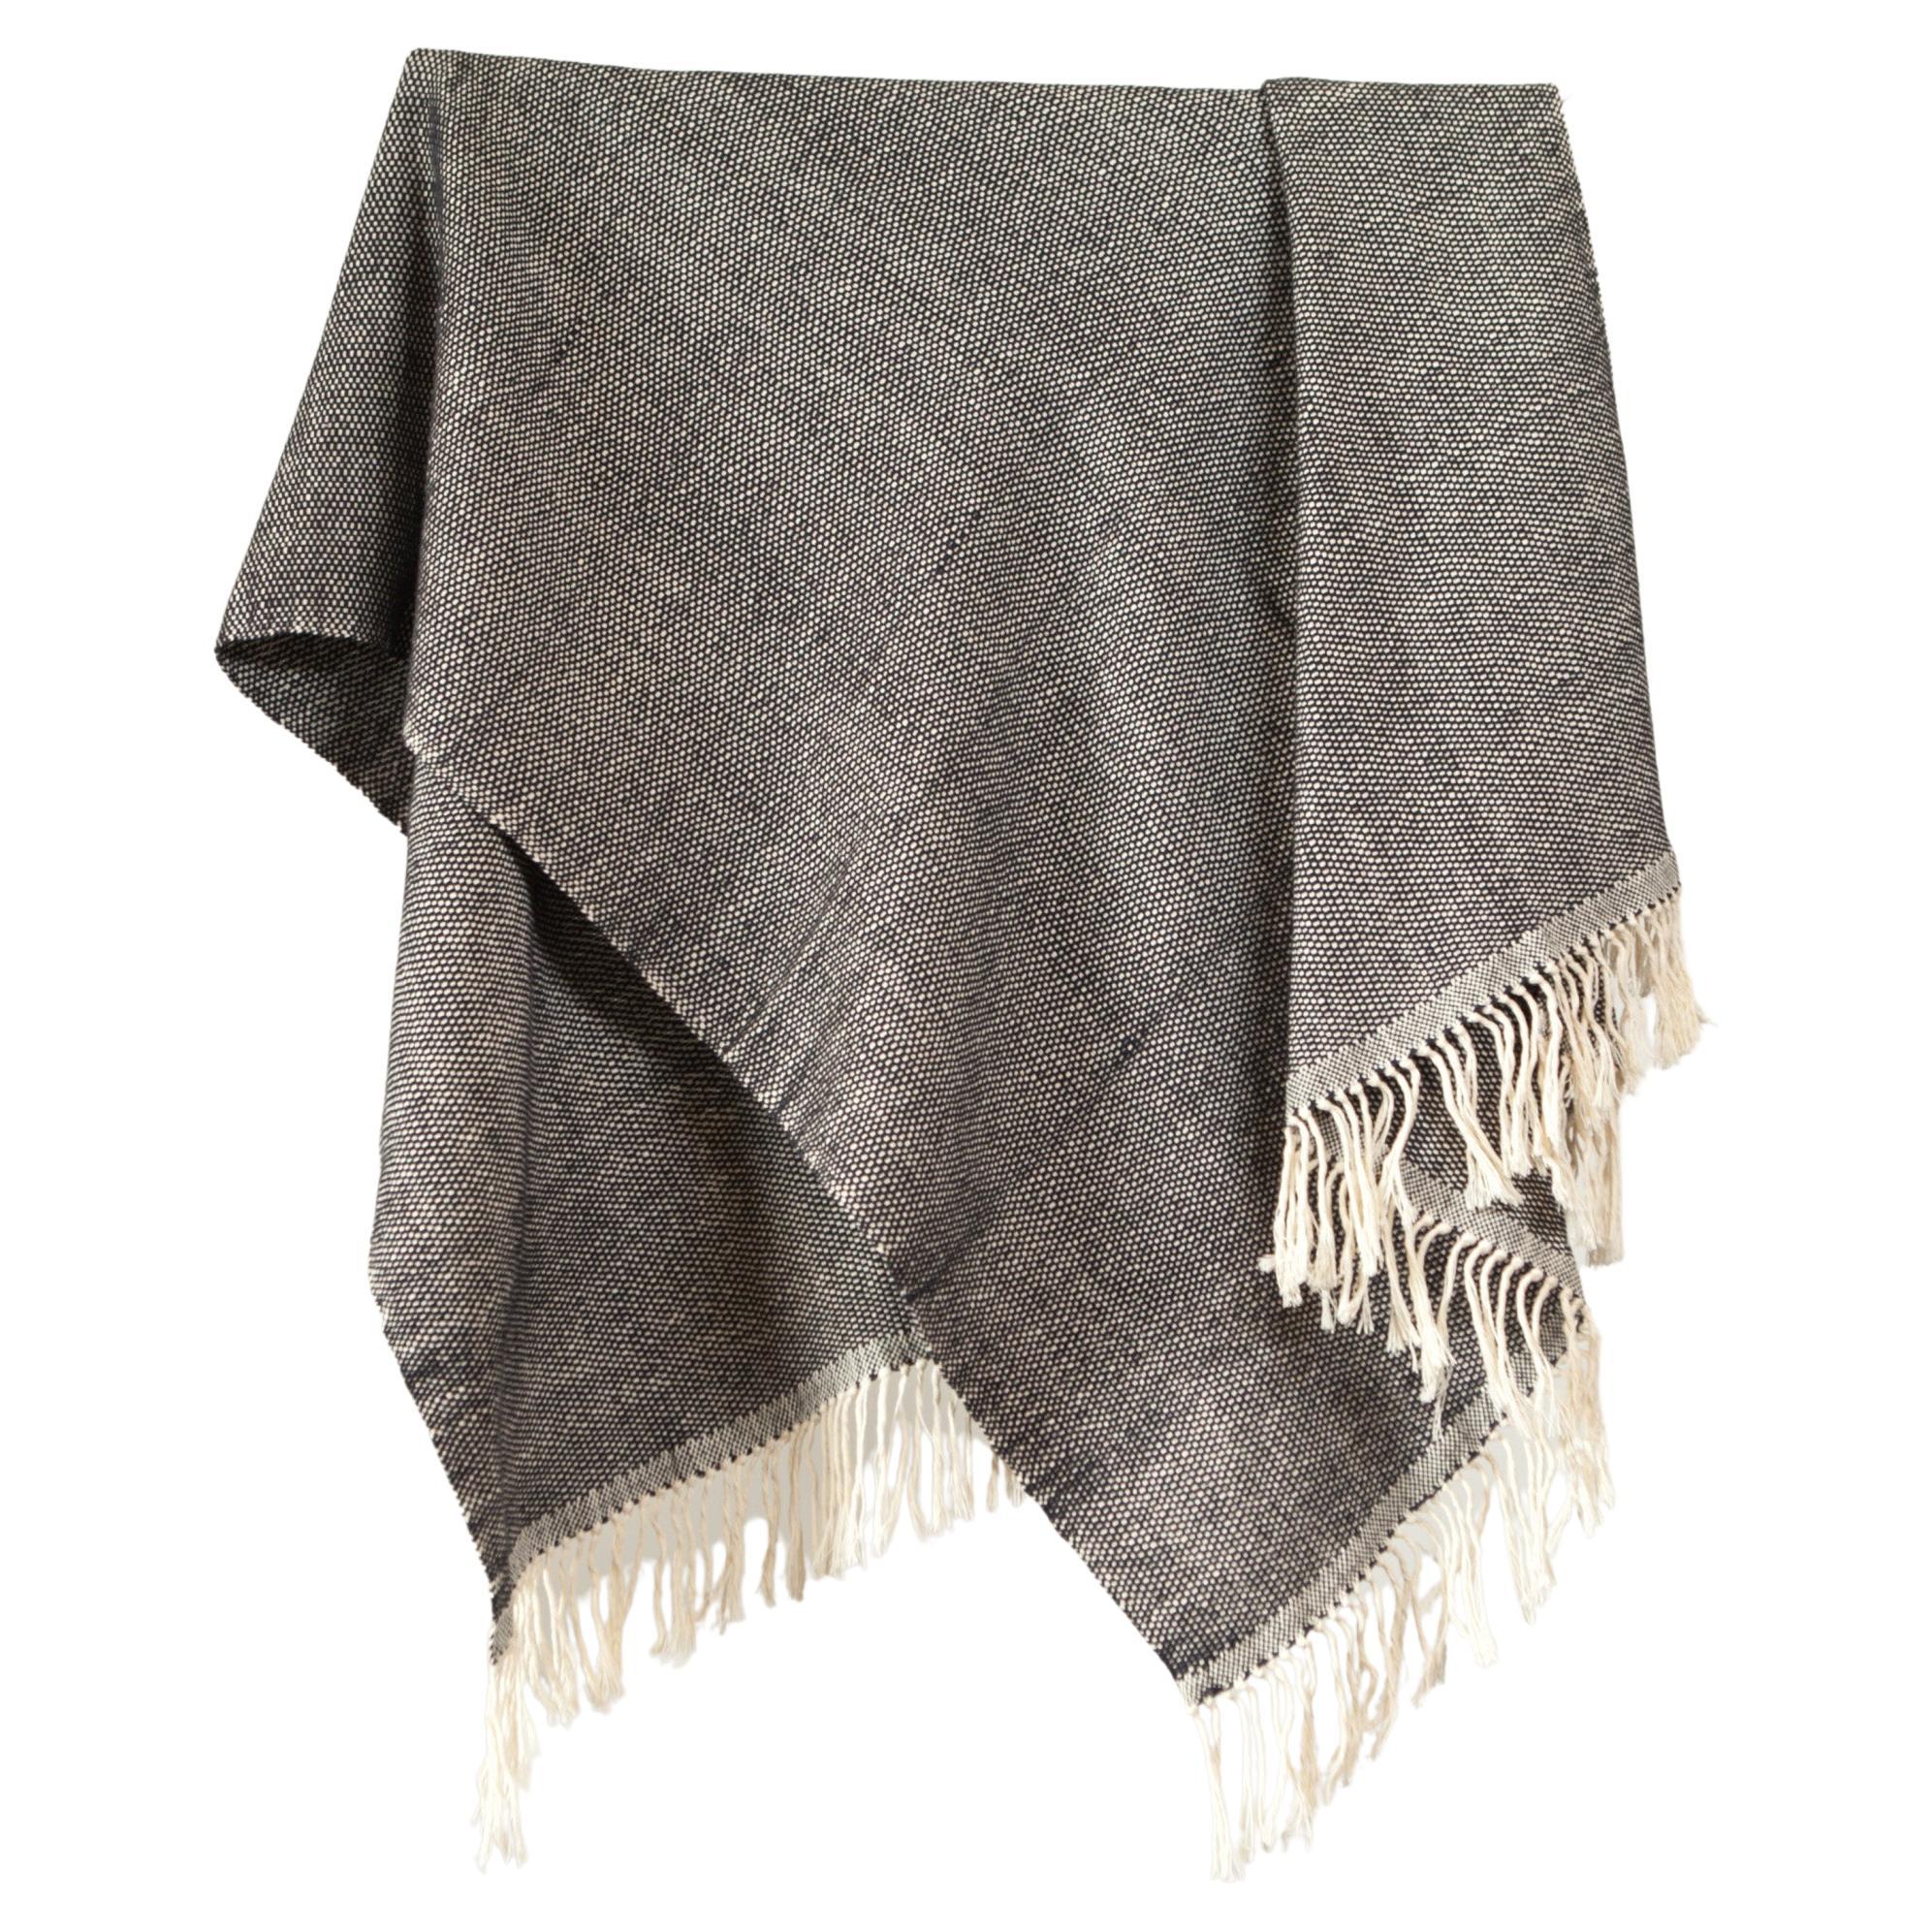 Handwoven Cotton Throw in Natural and Gray Check Weave, in Stock